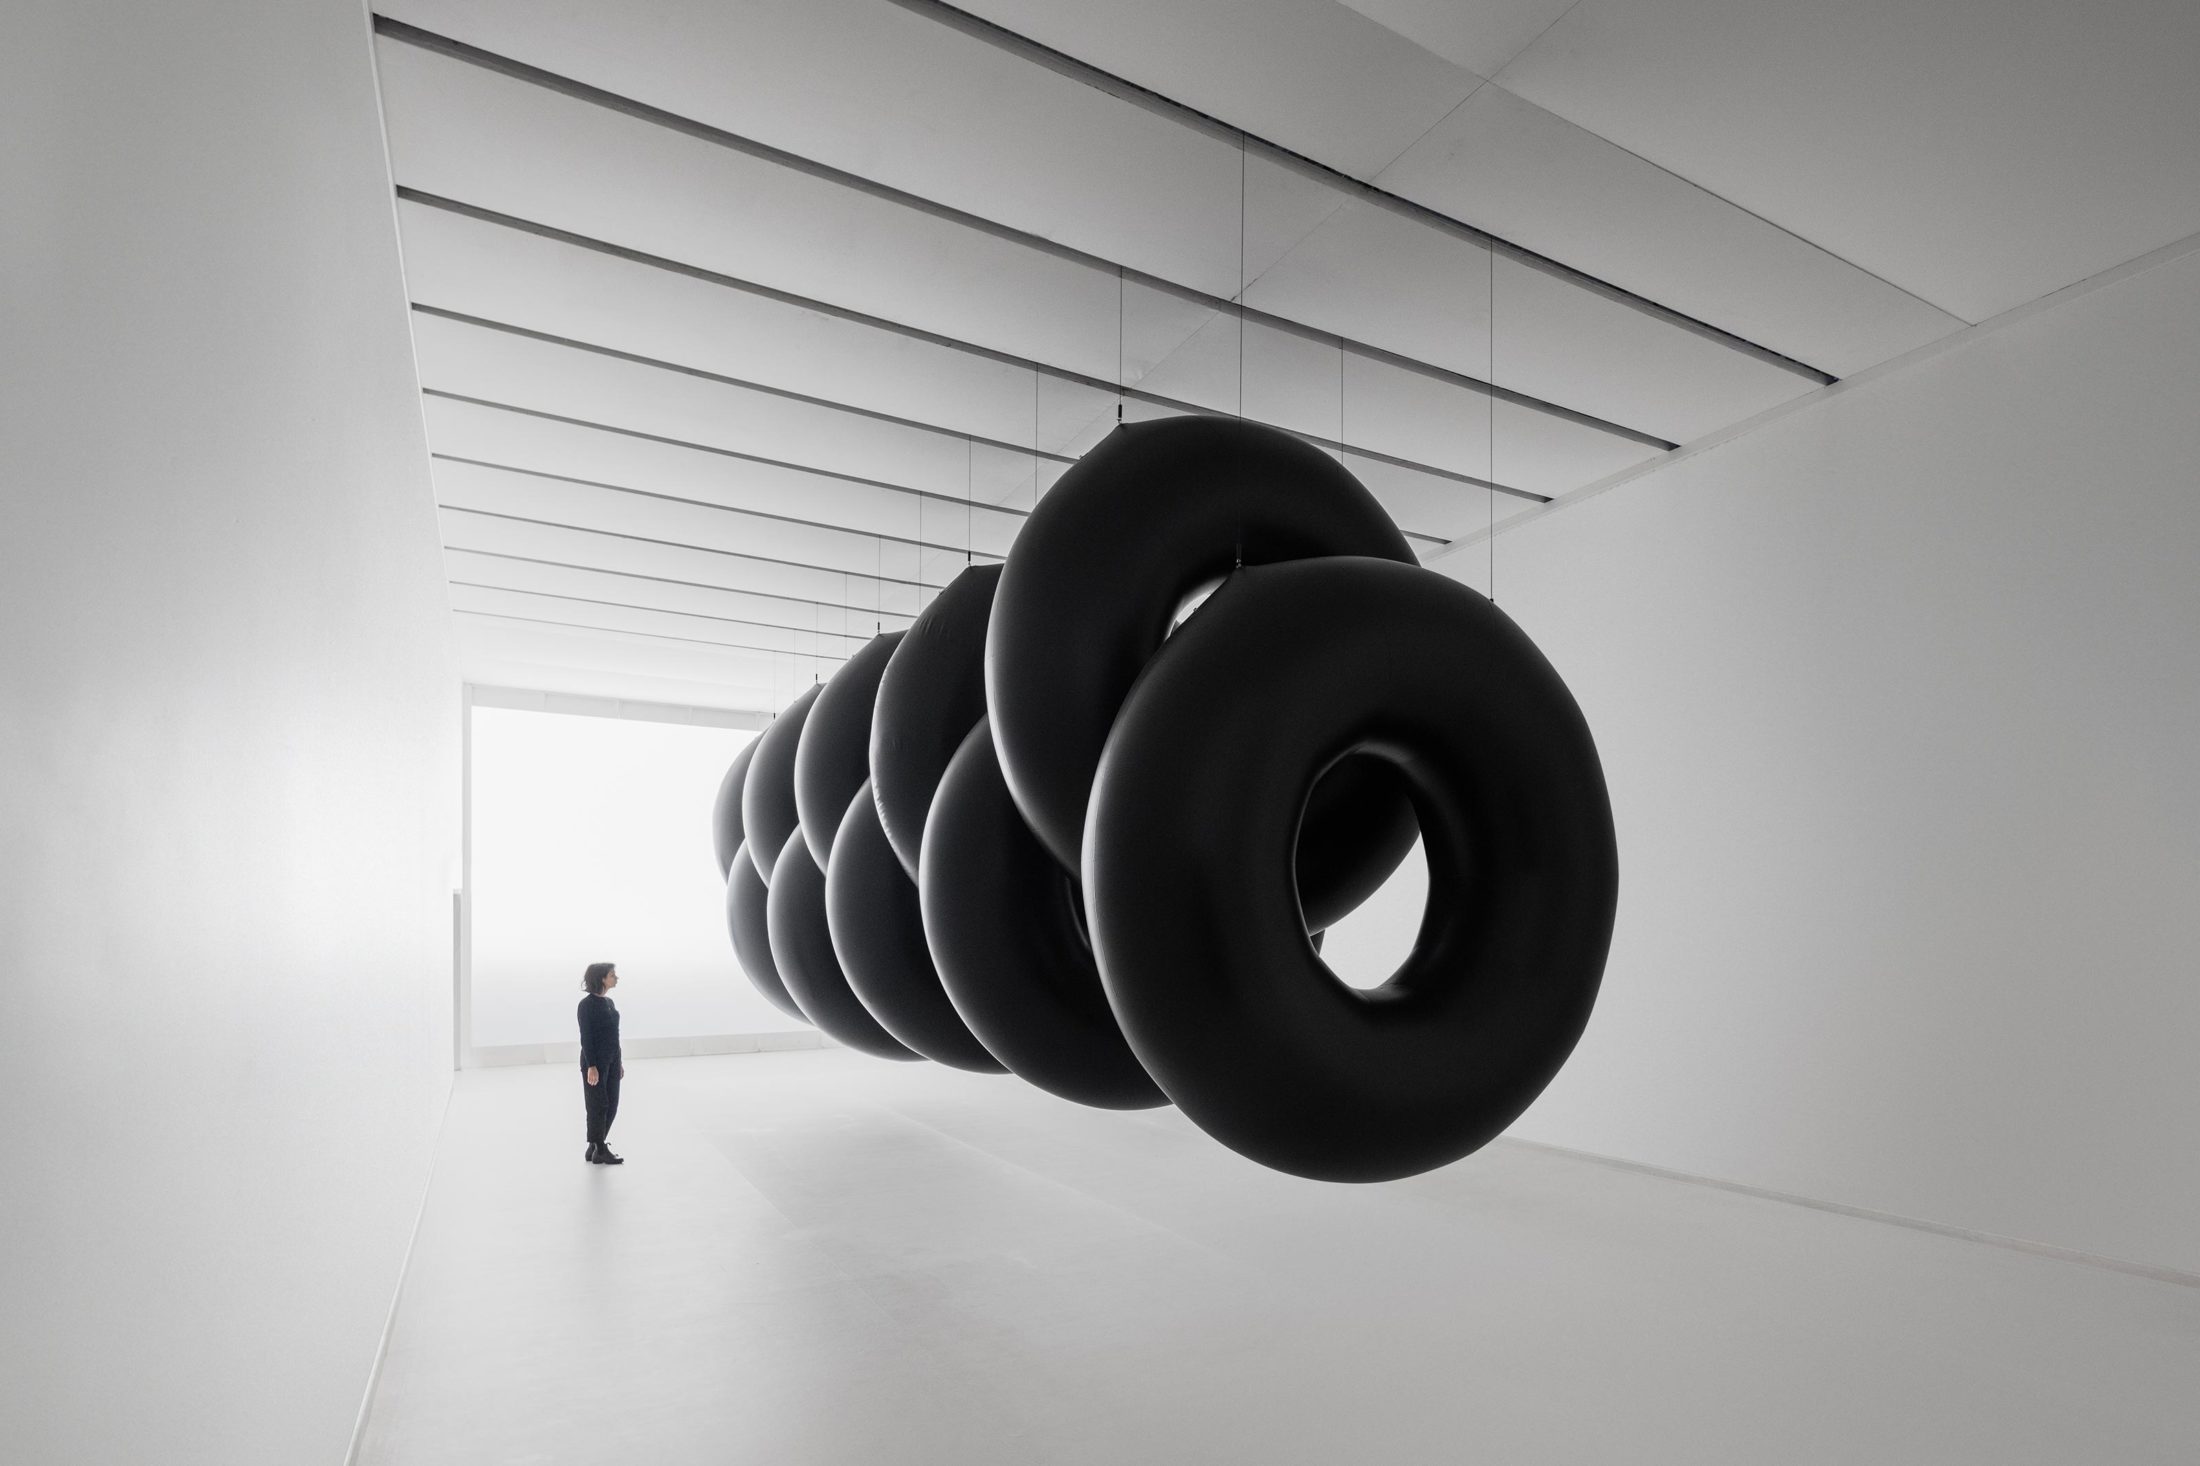 ZEROS NYC - USA 2023 ZEROS is a large-scale kinetic sculpture formed by ten massive inner tubes that move to a slow choreography.